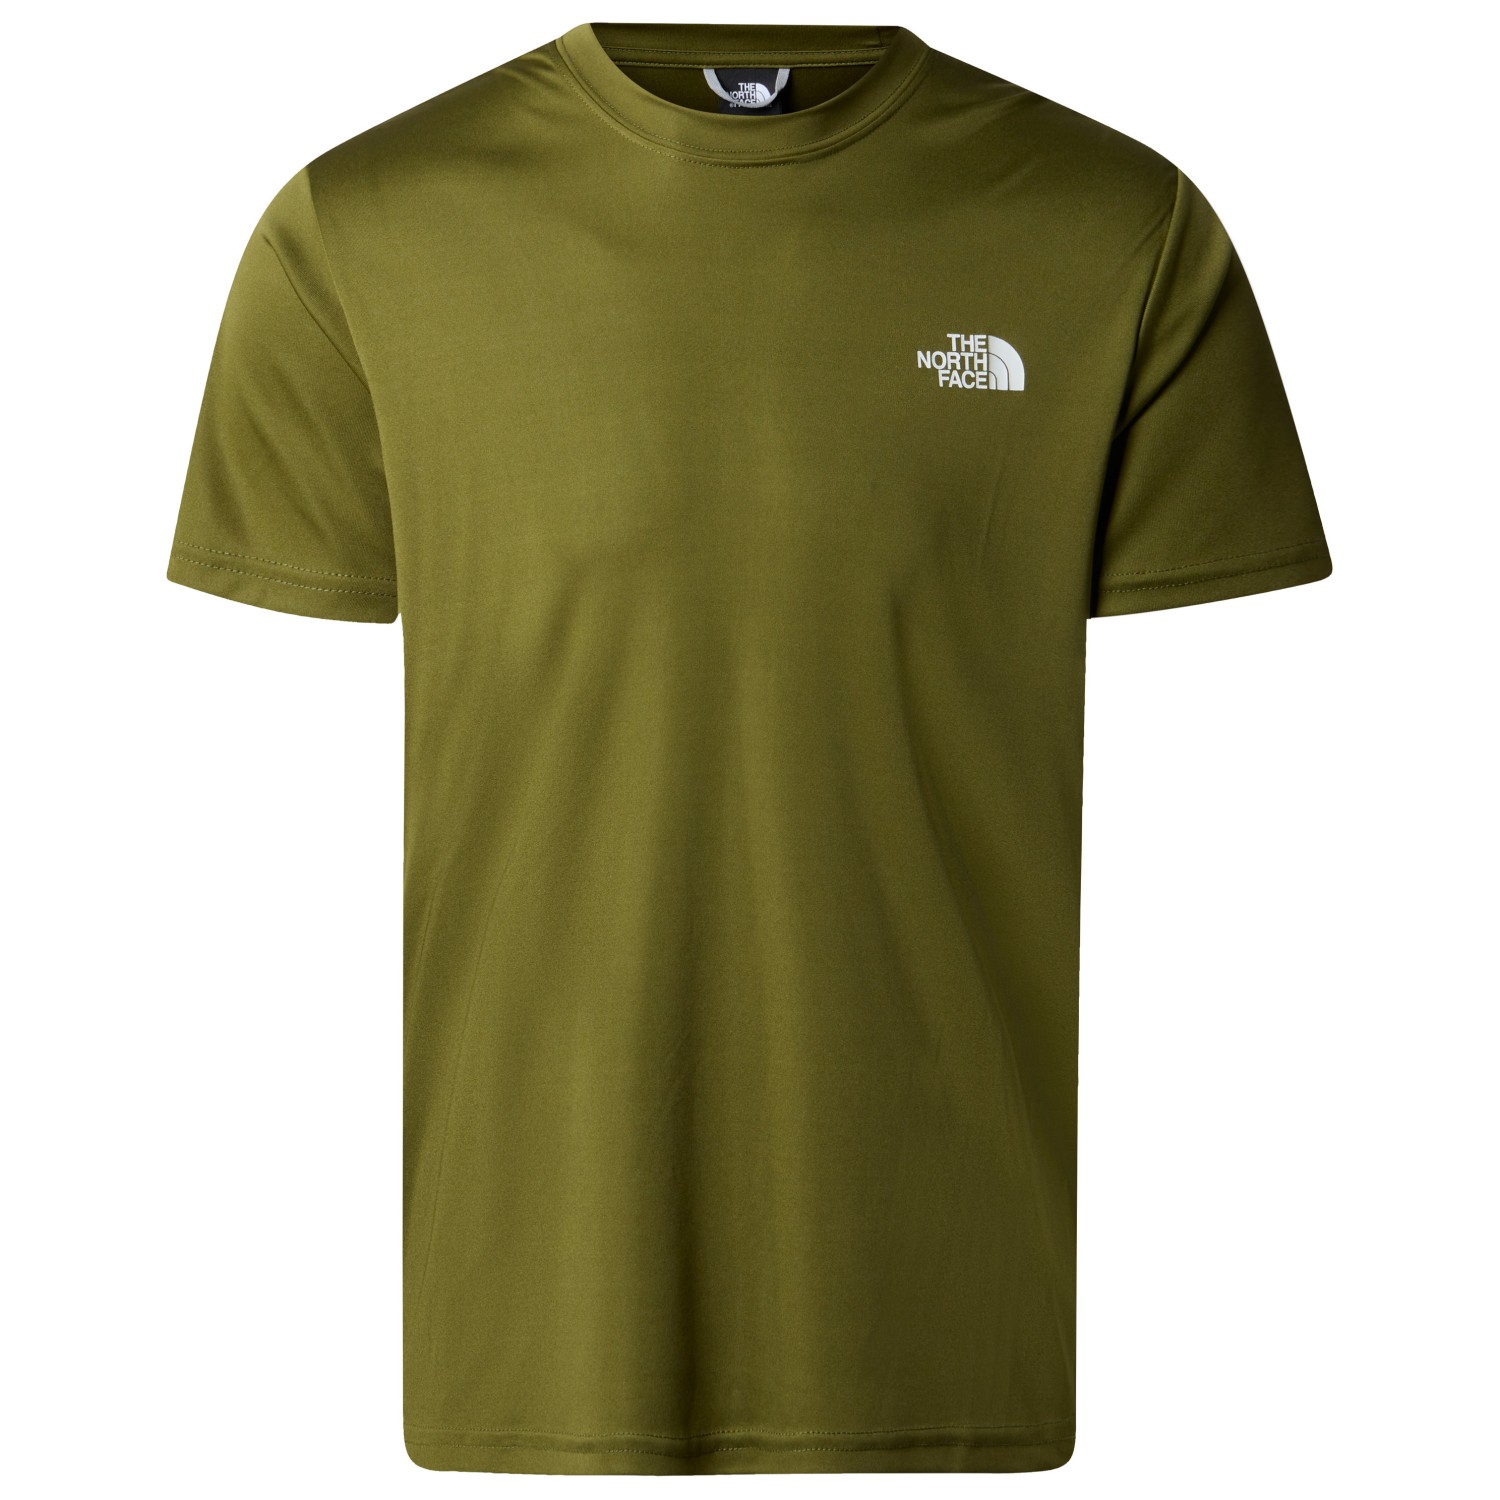 Функциональная рубашка The North Face Reaxion Red Box Tee, цвет Forest Olive